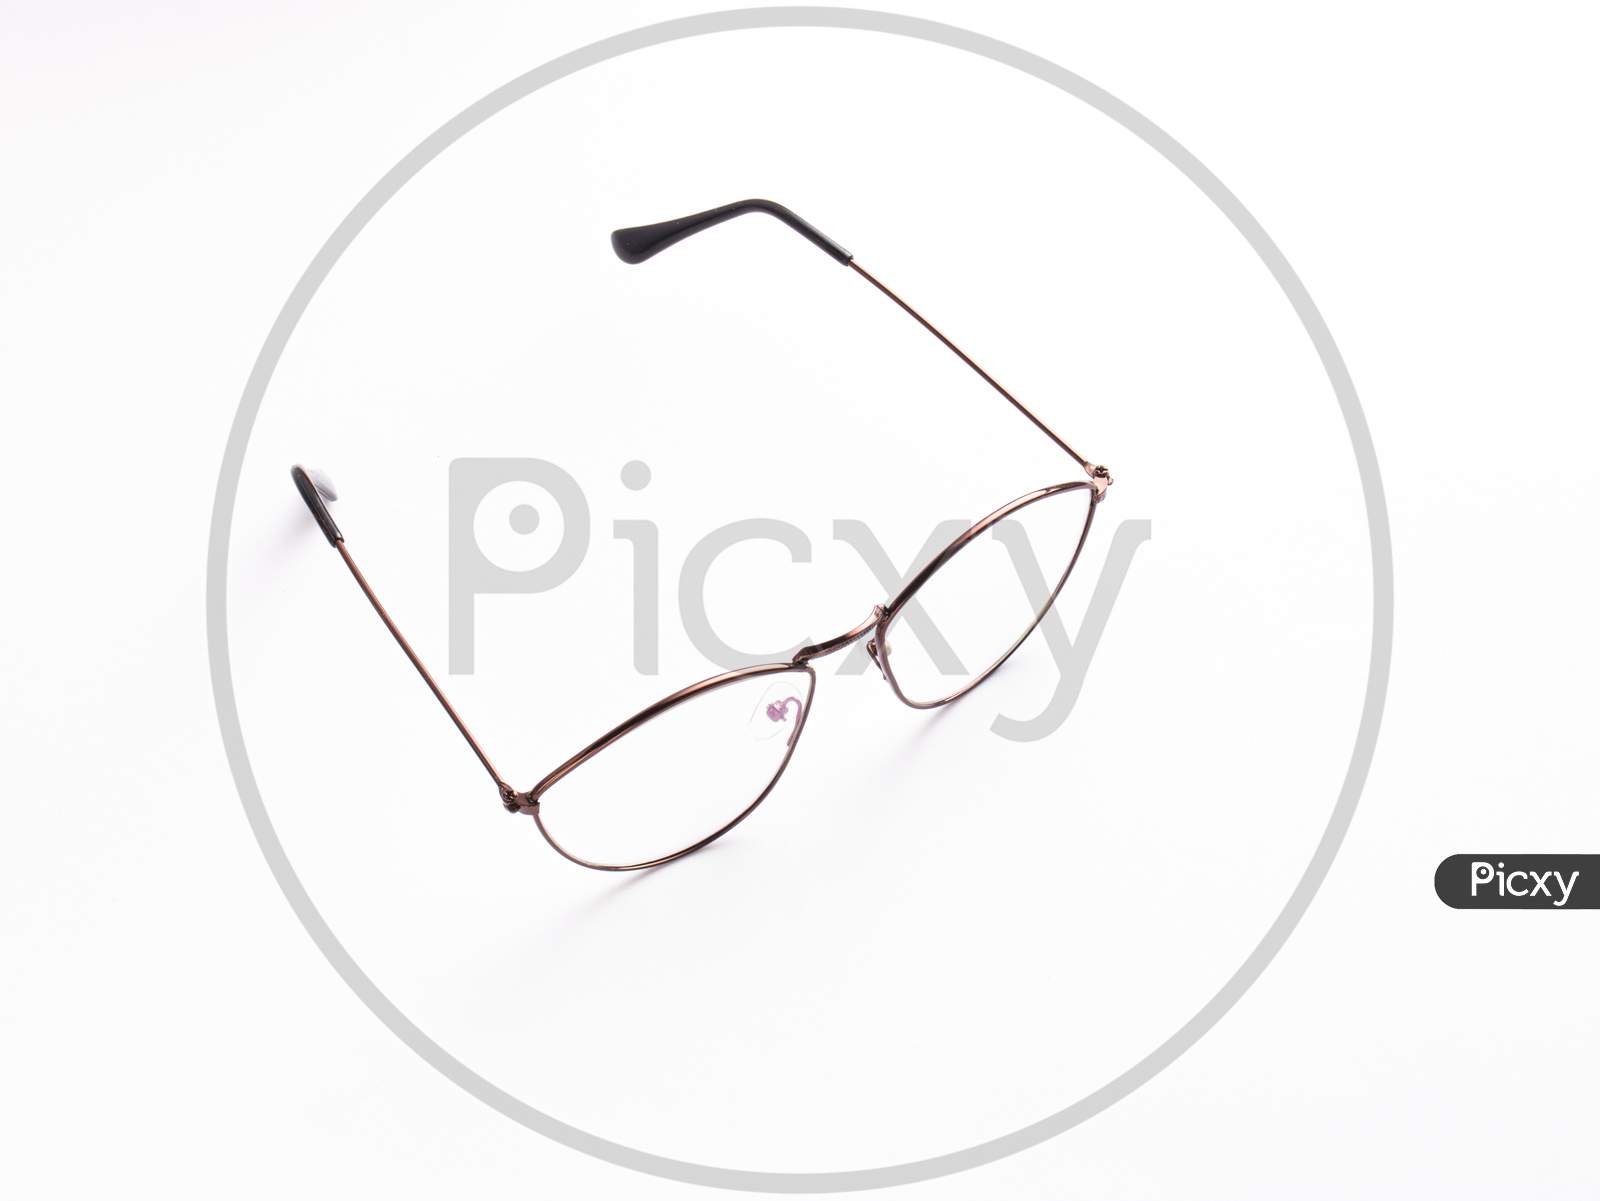 Shades or Goggles  On White Isolated Background